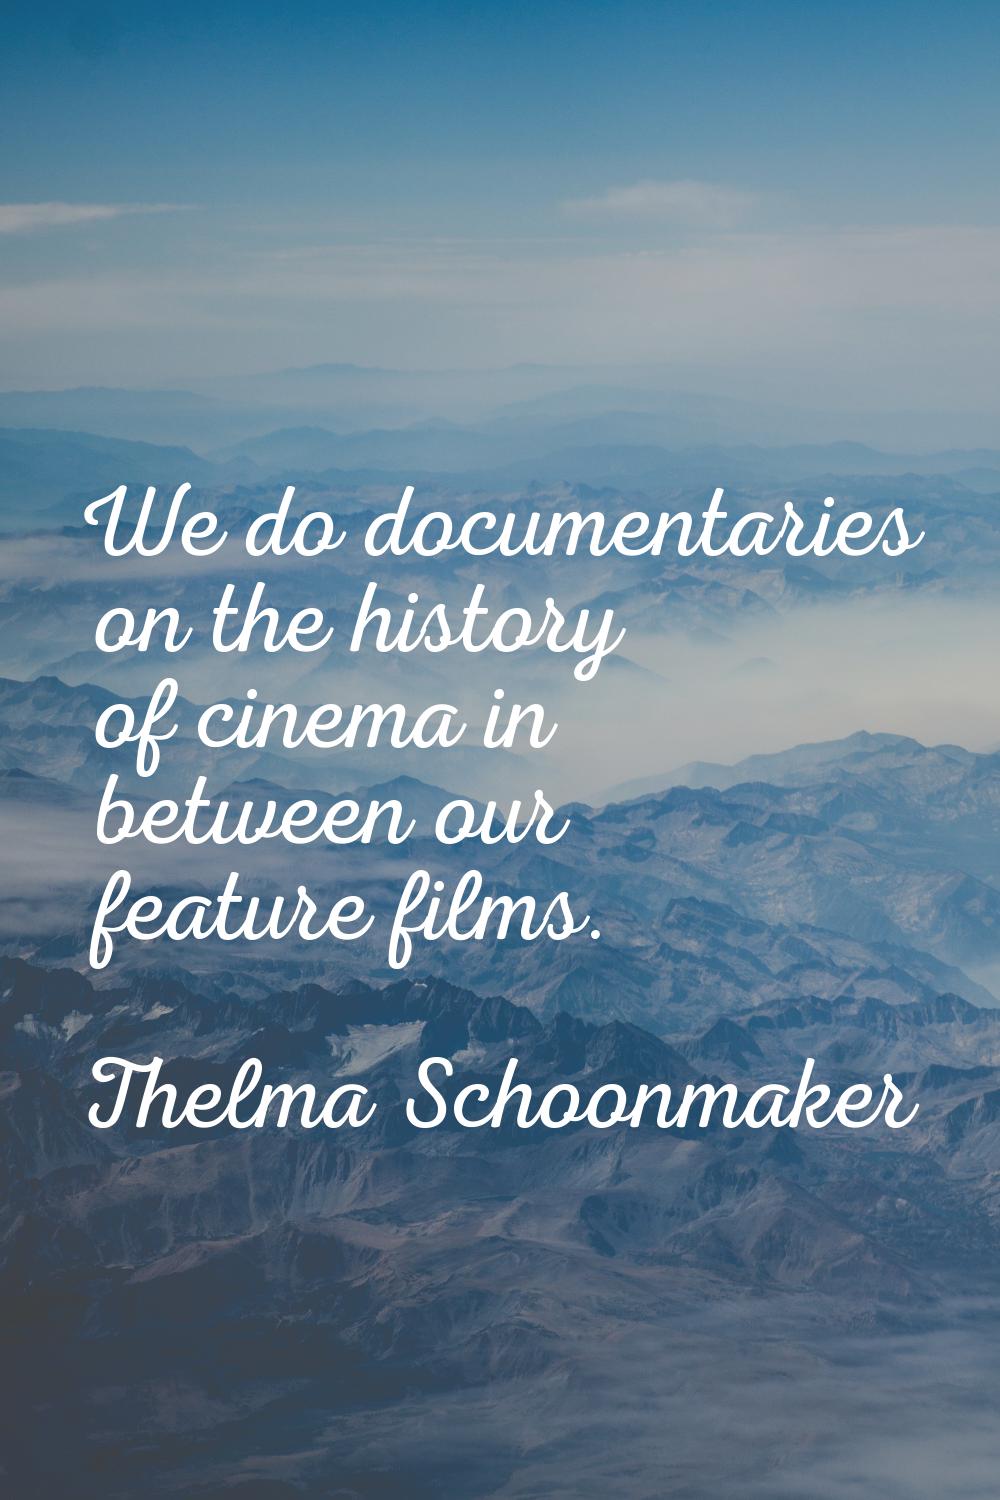 We do documentaries on the history of cinema in between our feature films.